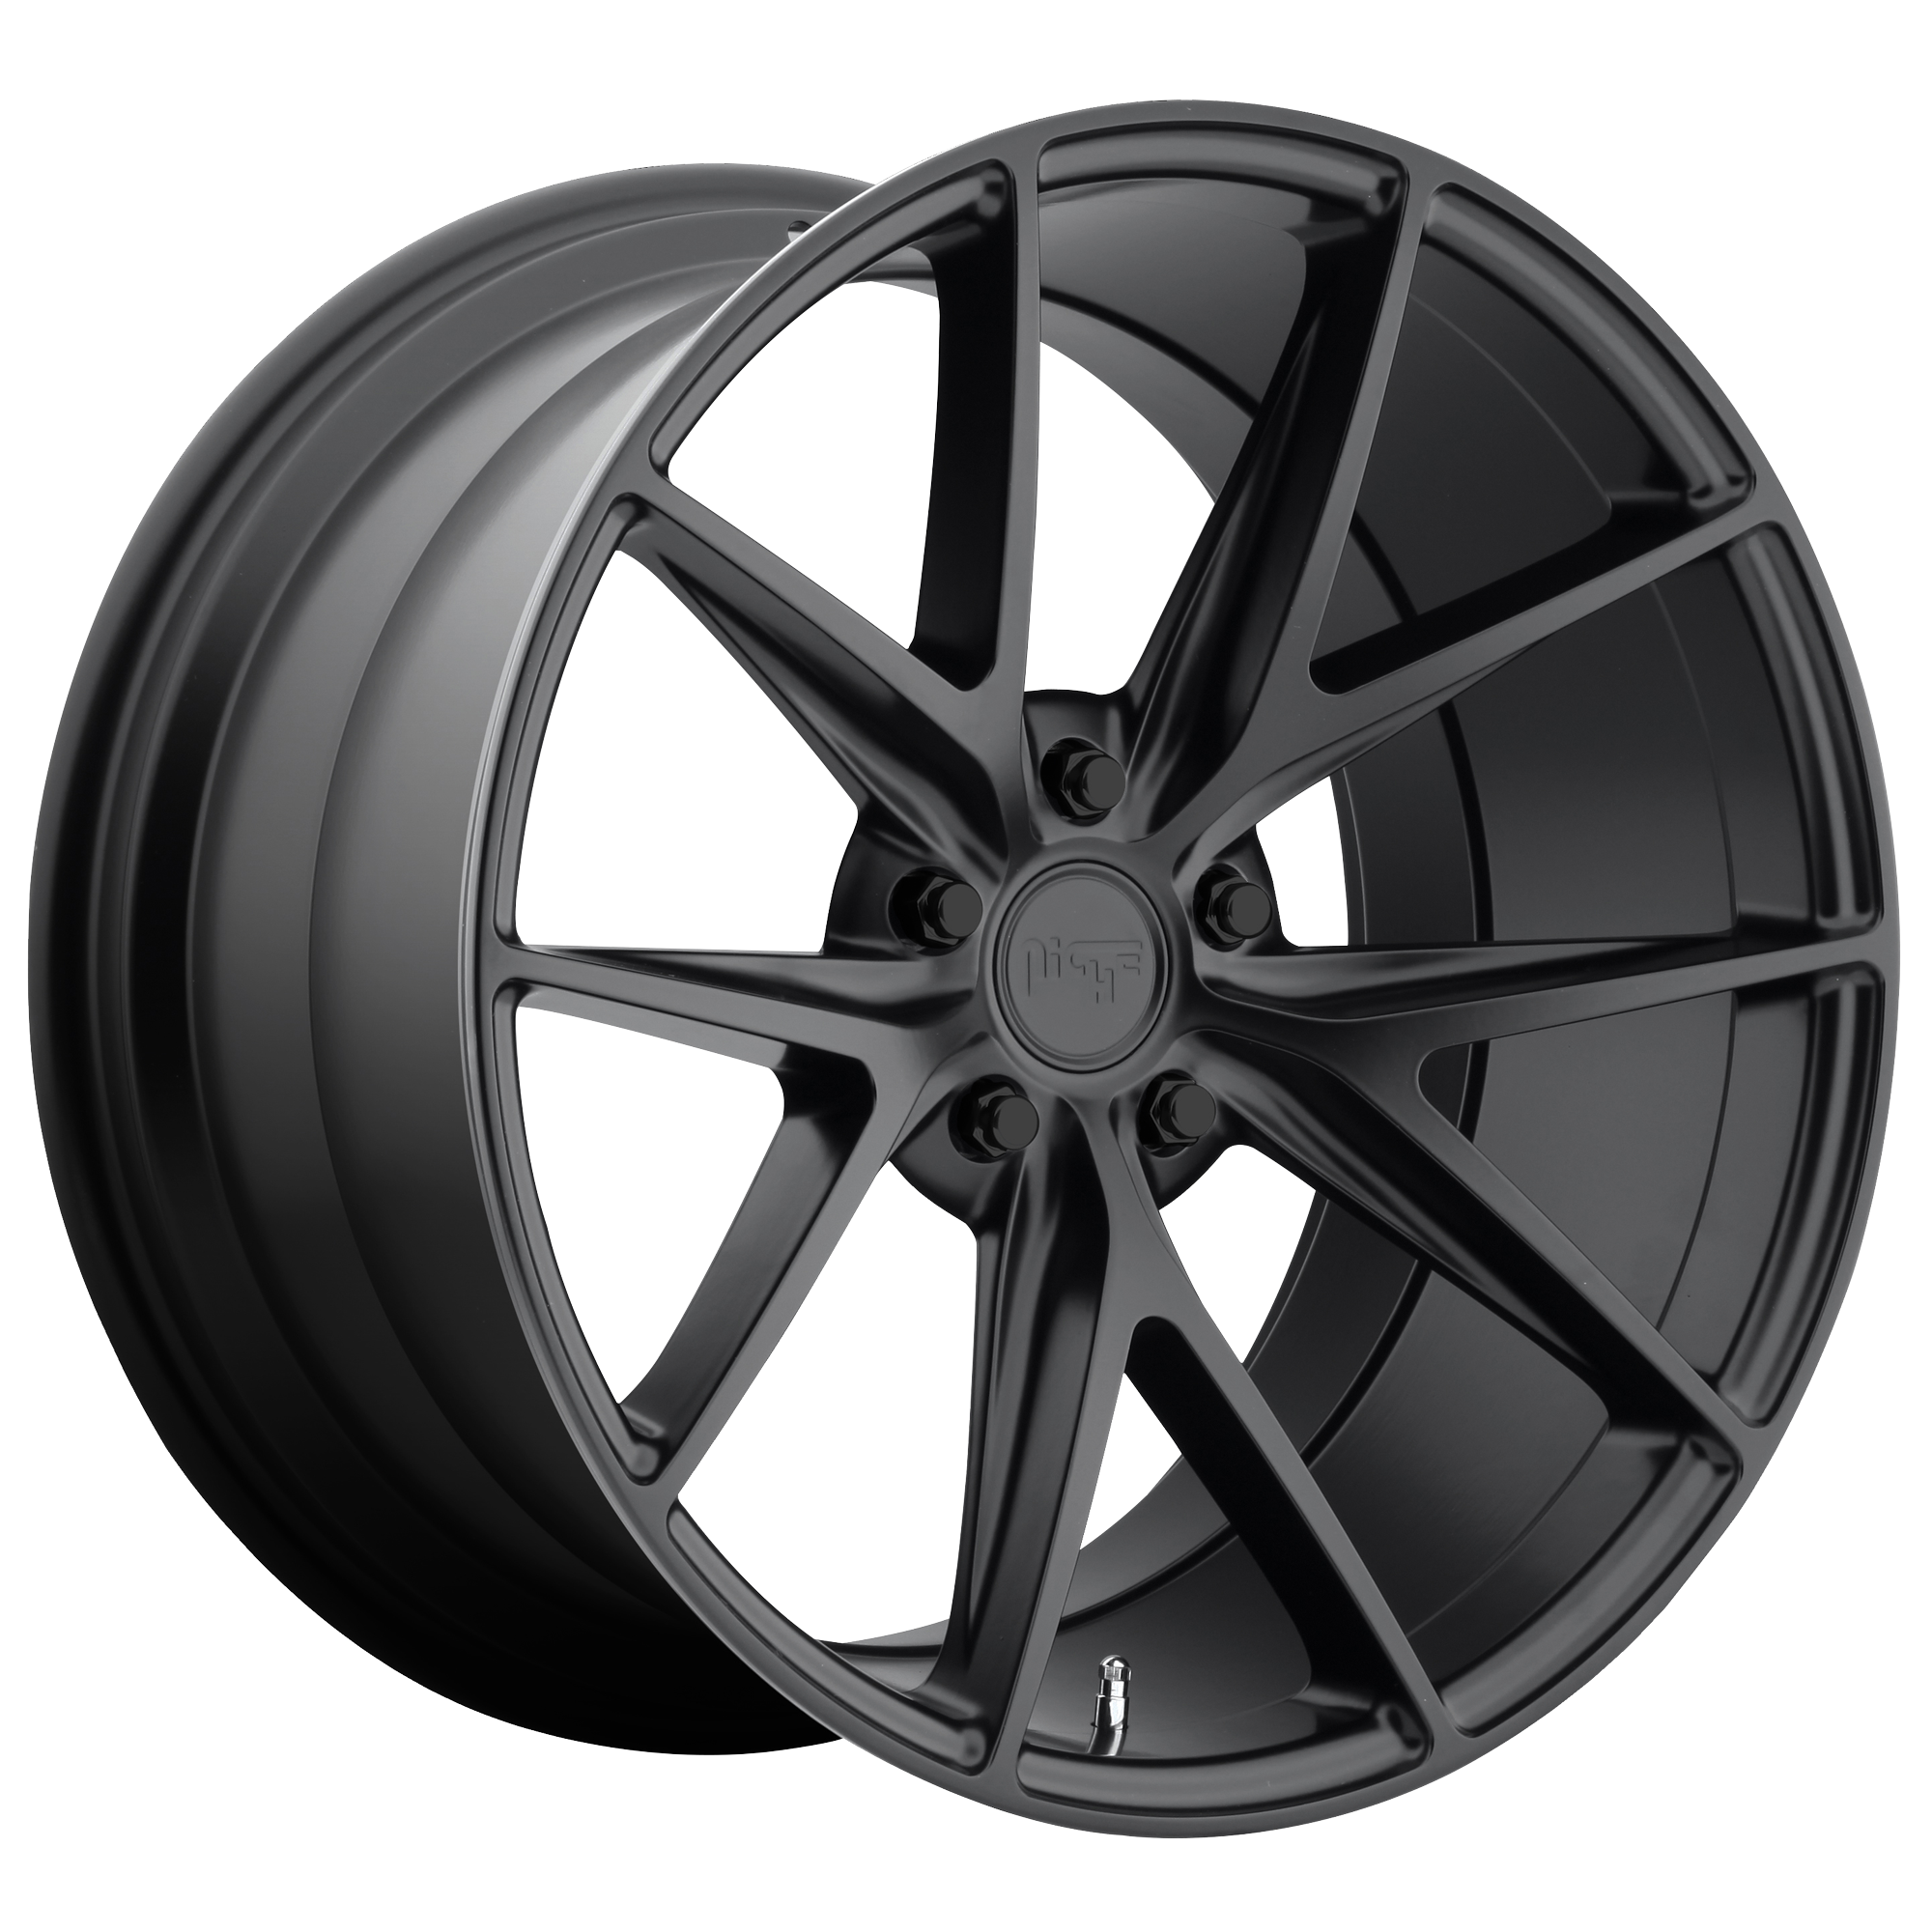 MISANO 18x9.5 5x120.00 MATTE BLACK (40 mm) - Tires and Engine Performance